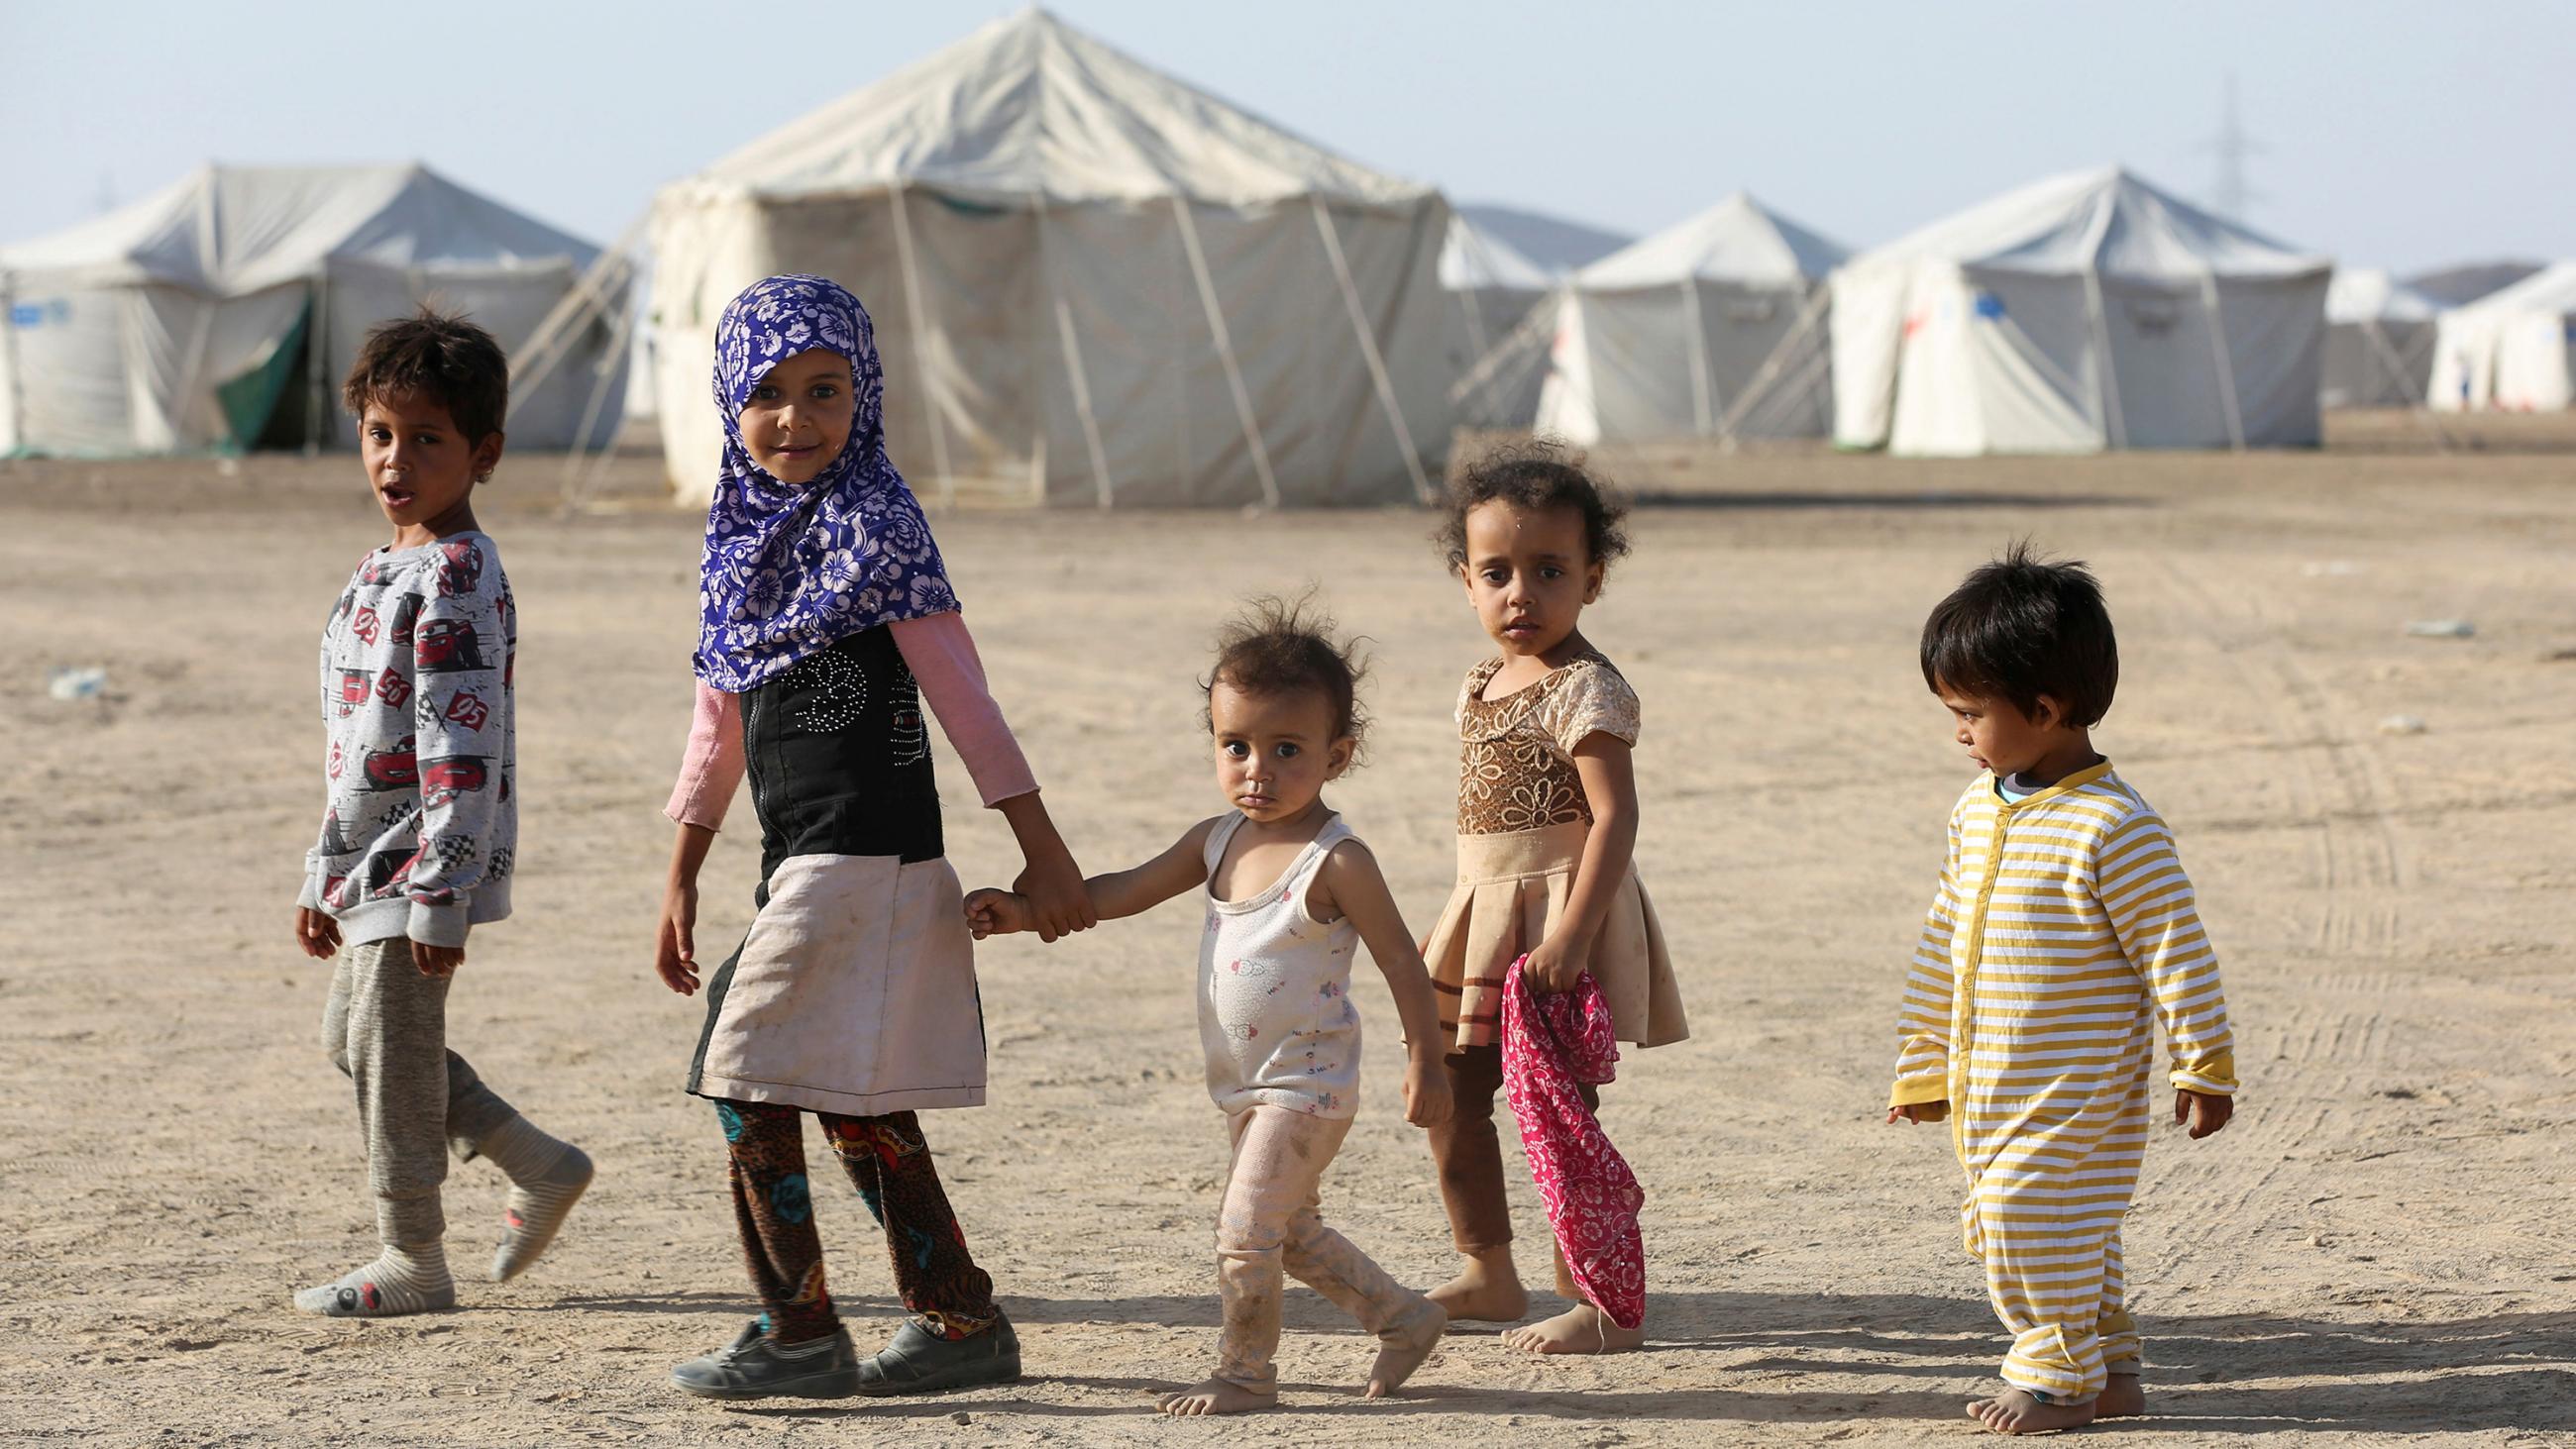  Picture shows a line of five children walking together in front of a camp filled with white tents and looking at the camera. All are very young, two who appear under eight years old, and three who appear under five. 